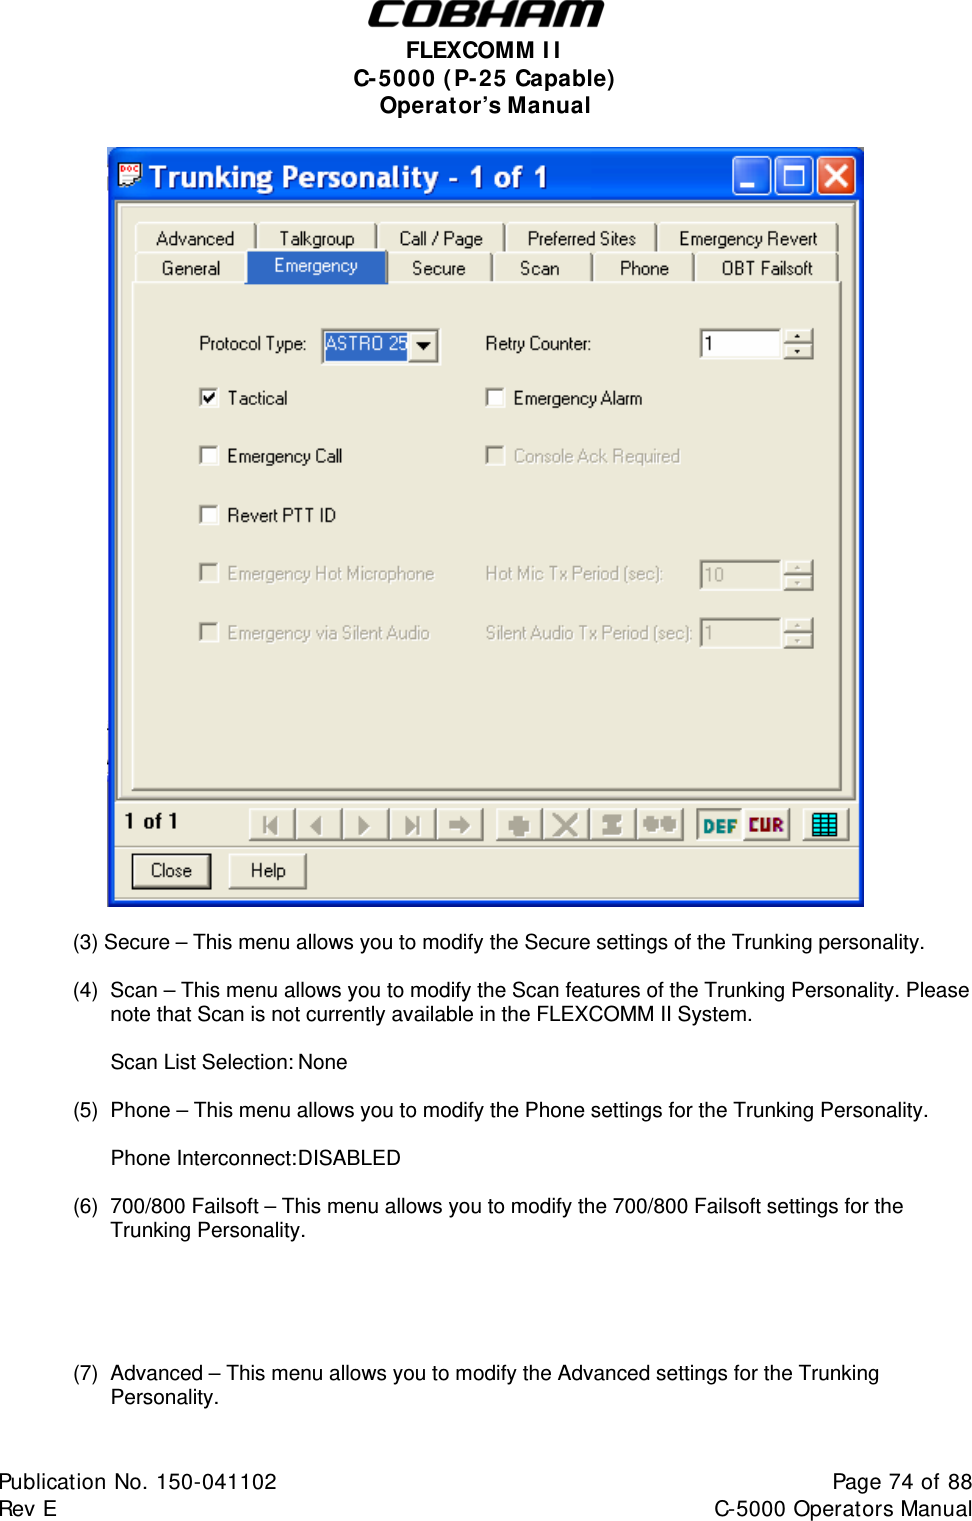  FLEXCOMM II C-5000 (P-25 Capable) Operator’s Manual   (3) Secure – This menu allows you to modify the Secure settings of the Trunking personality.  (4)  Scan – This menu allows you to modify the Scan features of the Trunking Personality. Please note that Scan is not currently available in the FLEXCOMM II System.    Scan List Selection: None  (5)  Phone – This menu allows you to modify the Phone settings for the Trunking Personality.   Phone Interconnect: DISABLED  (6)  700/800 Failsoft – This menu allows you to modify the 700/800 Failsoft settings for the Trunking Personality.      (7)  Advanced – This menu allows you to modify the Advanced settings for the Trunking Personality.  Publication No. 150-041102  Page 74 of 88  Rev E  C-5000 Operators Manual    